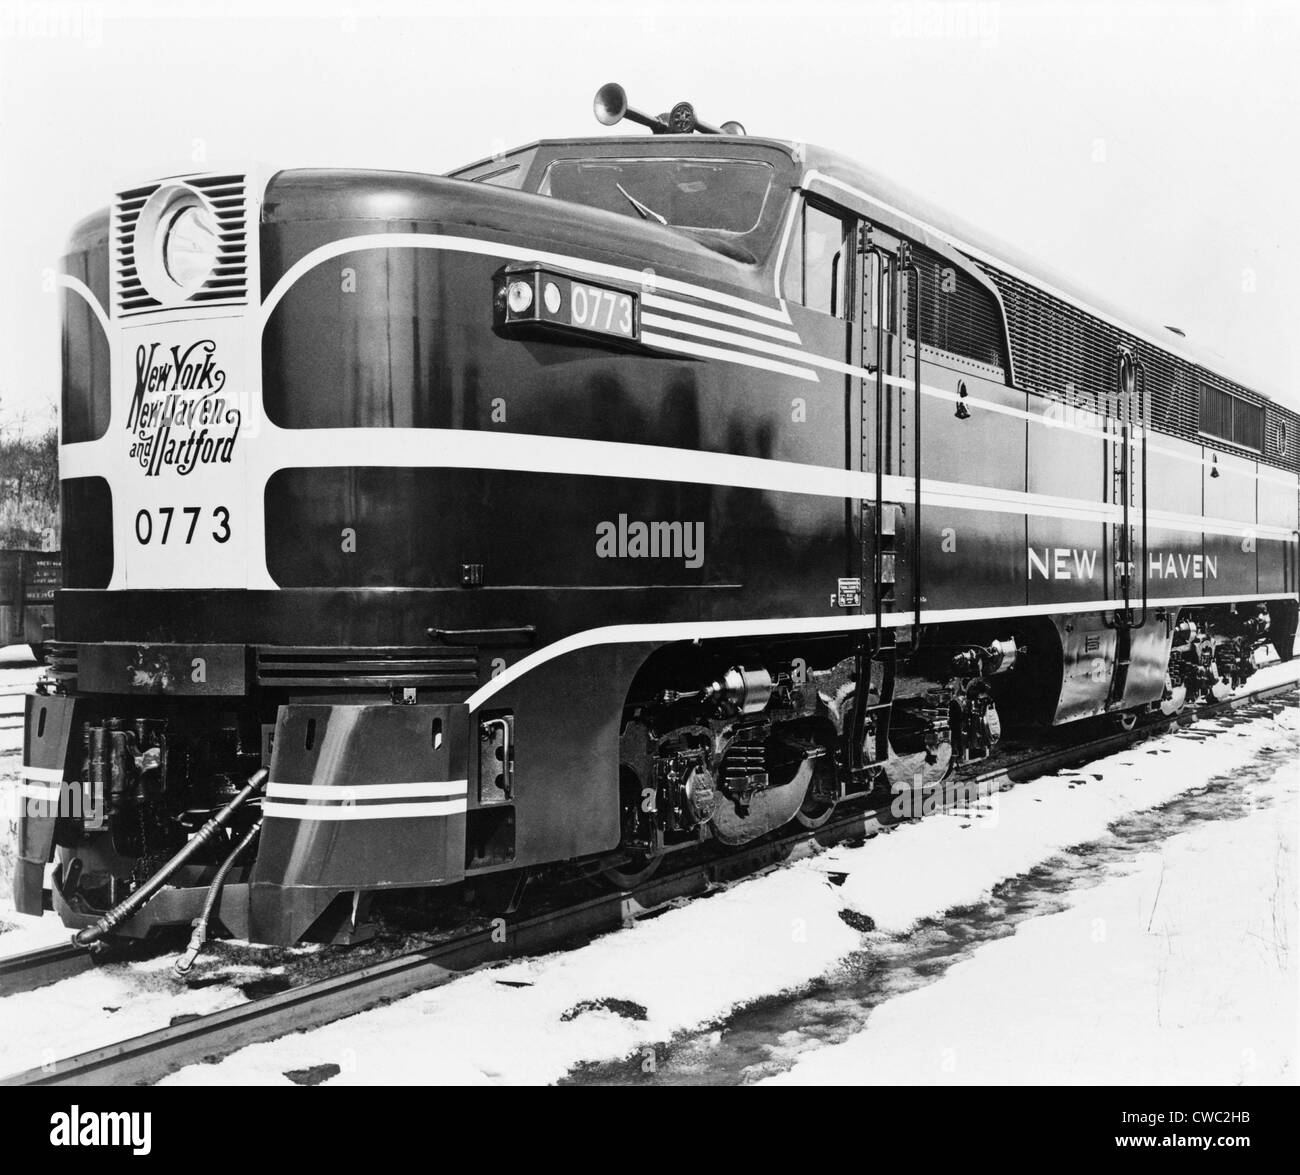 Diesel engines replaced coal powered steam locomotives in the mid-20th century. This hybrid diesel-electric engine ran on Stock Photo